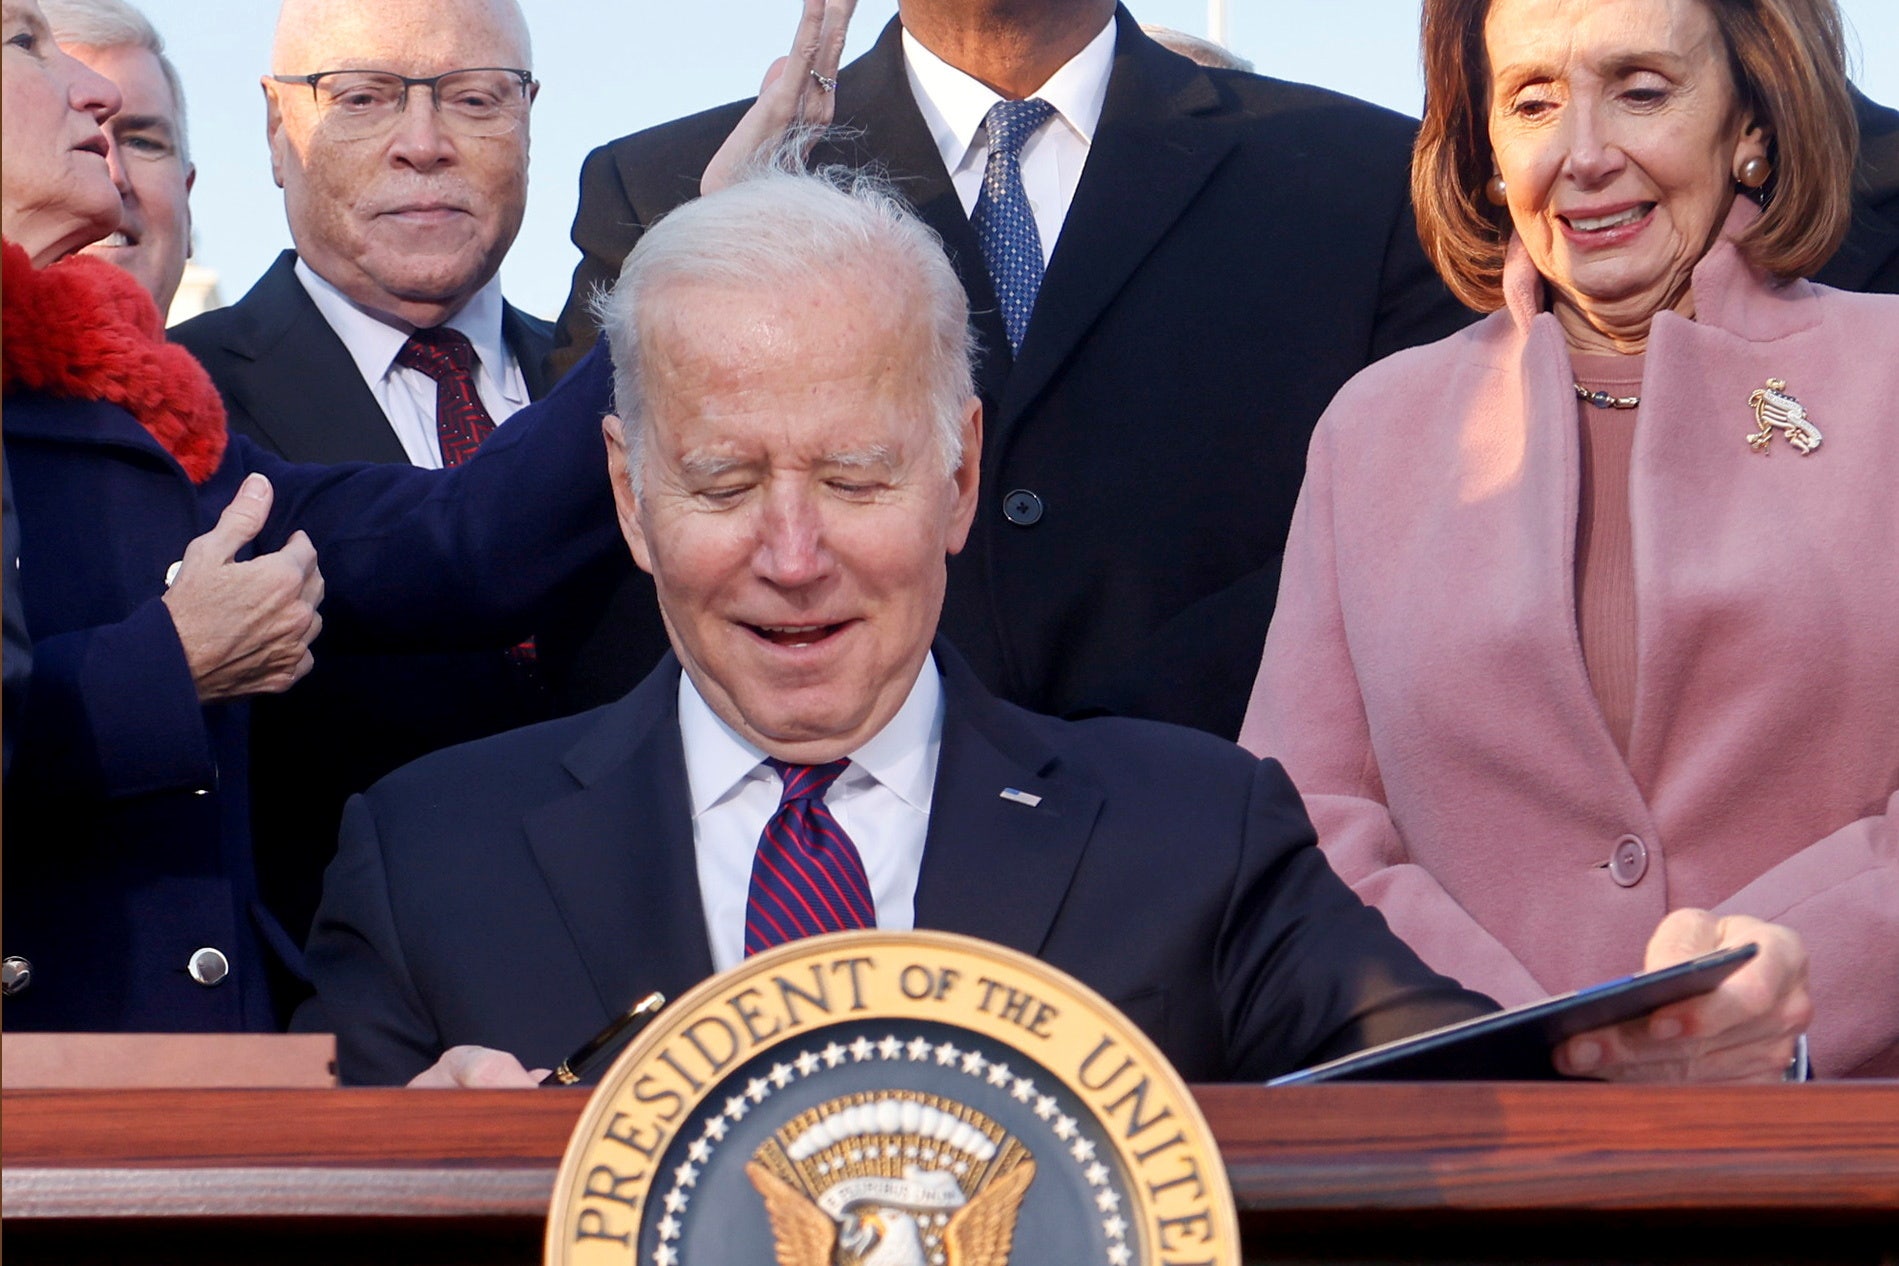 Did 2022 and 2024 politics play a role in Biden's infrastructure trip to New Hampshire?